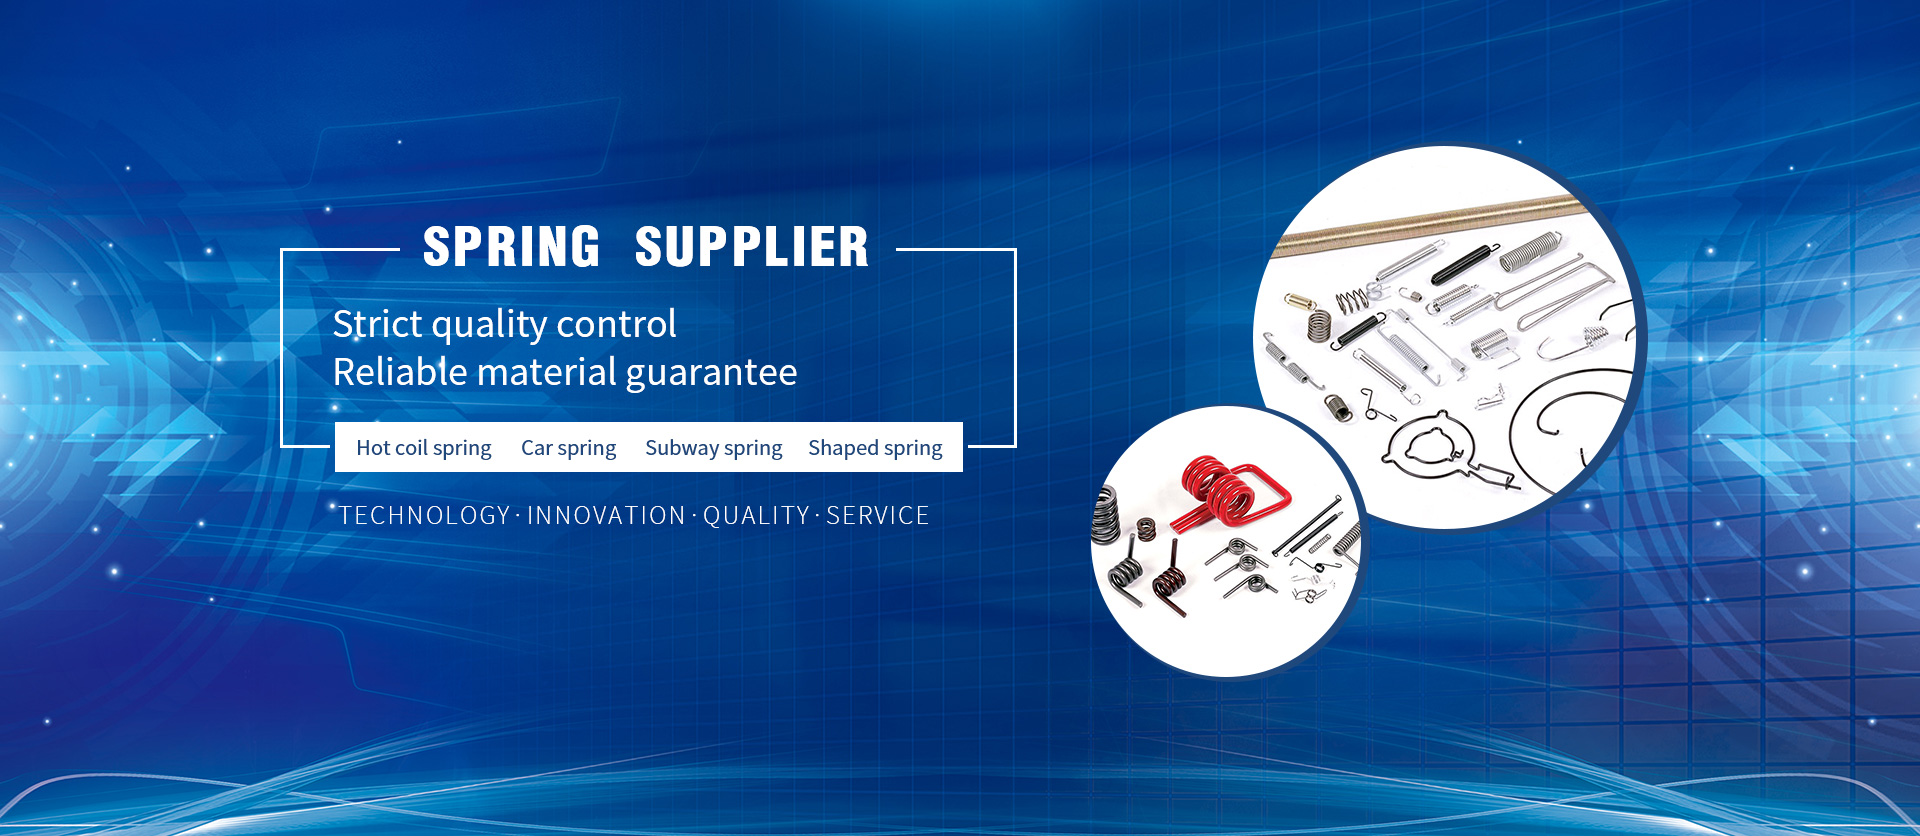 Spring product supplier